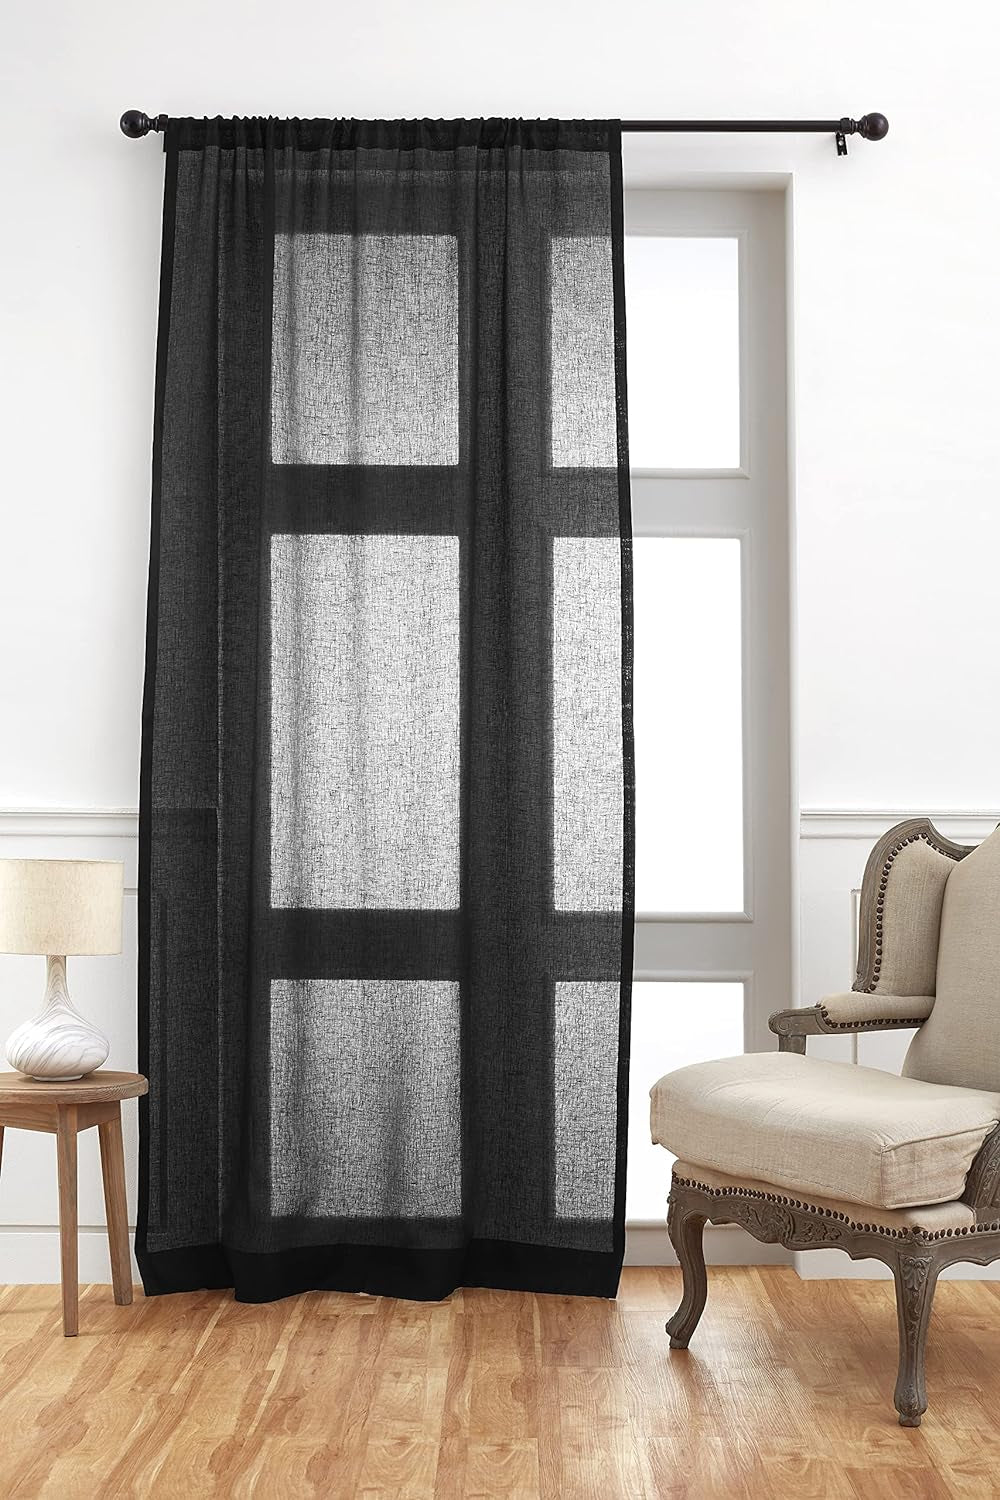 Solino Home Linen Sheer Curtain – 52 X 45 Inch Light Natural Rod Pocket Window Panel – 100% Pure Natural Fabric Curtain for Living Room, Indoor, Outdoor – Handcrafted from European Flax  Solino Home Black 52 X 63 Inch 